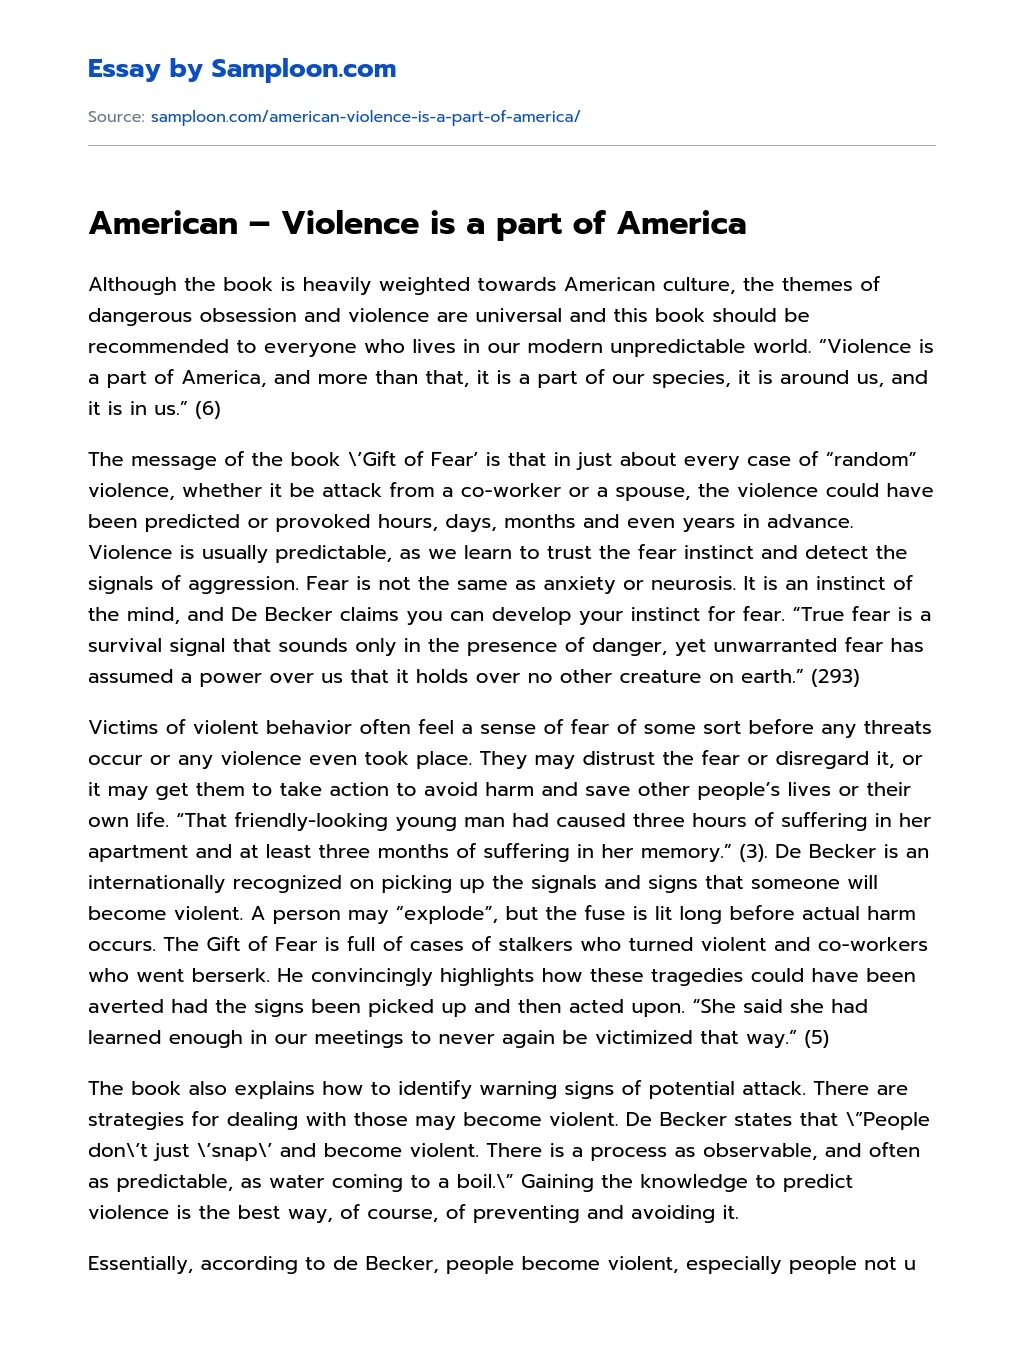 American – Violence is a part of America essay